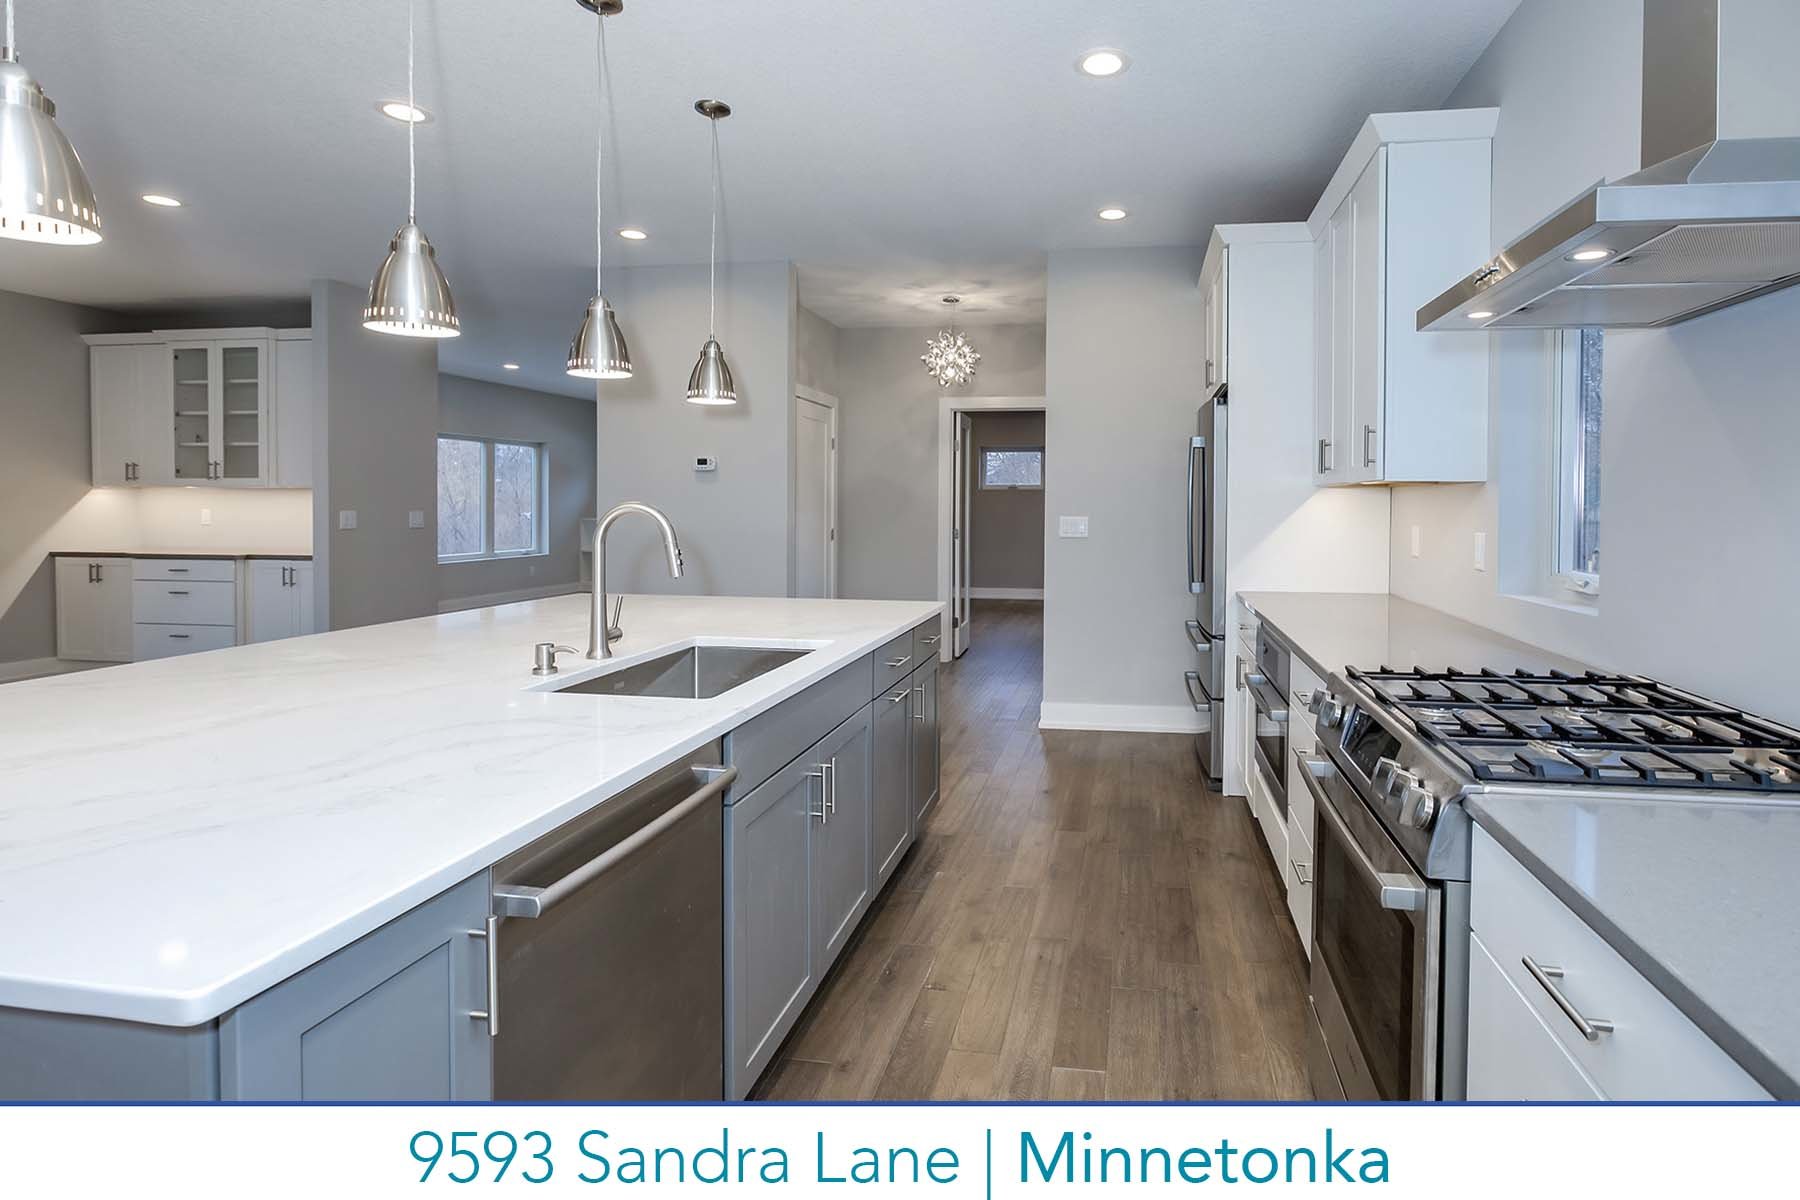 Newly built Minnetonka home for sale exclusve to the berg larsen group non-mls